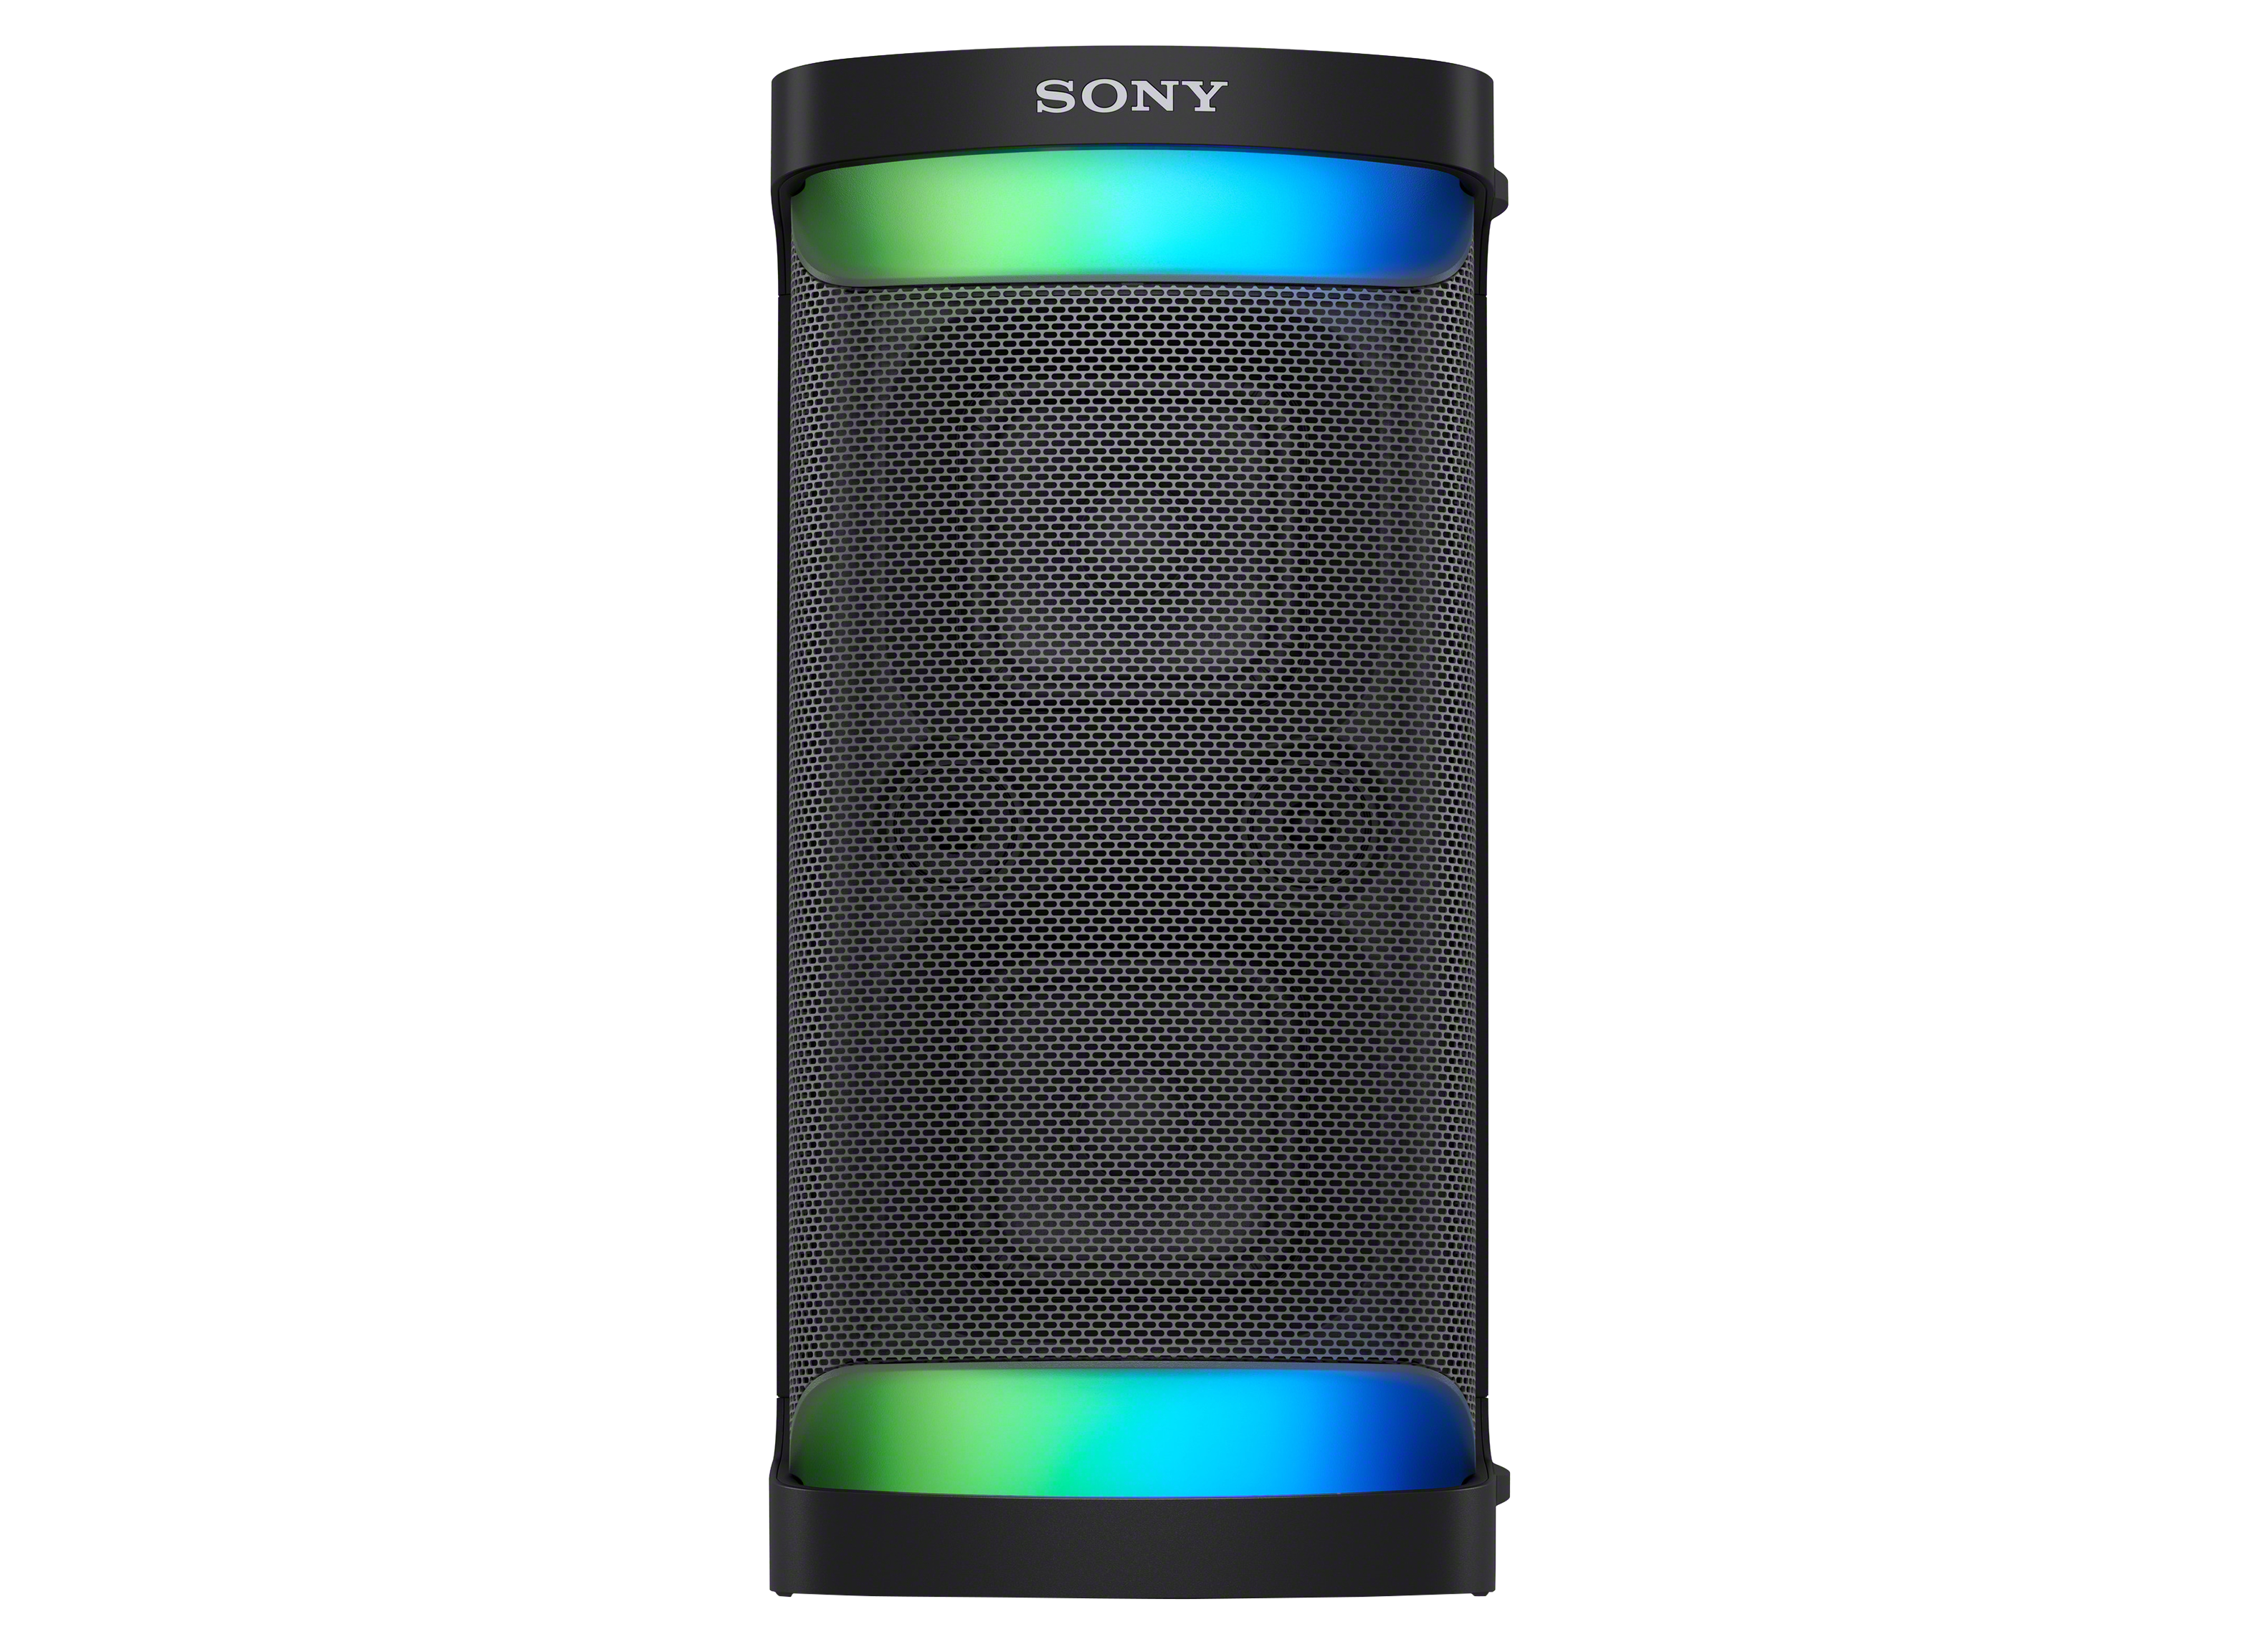 Sony SRS-XP500 Wireless & Bluetooth Speaker Review - Consumer Reports